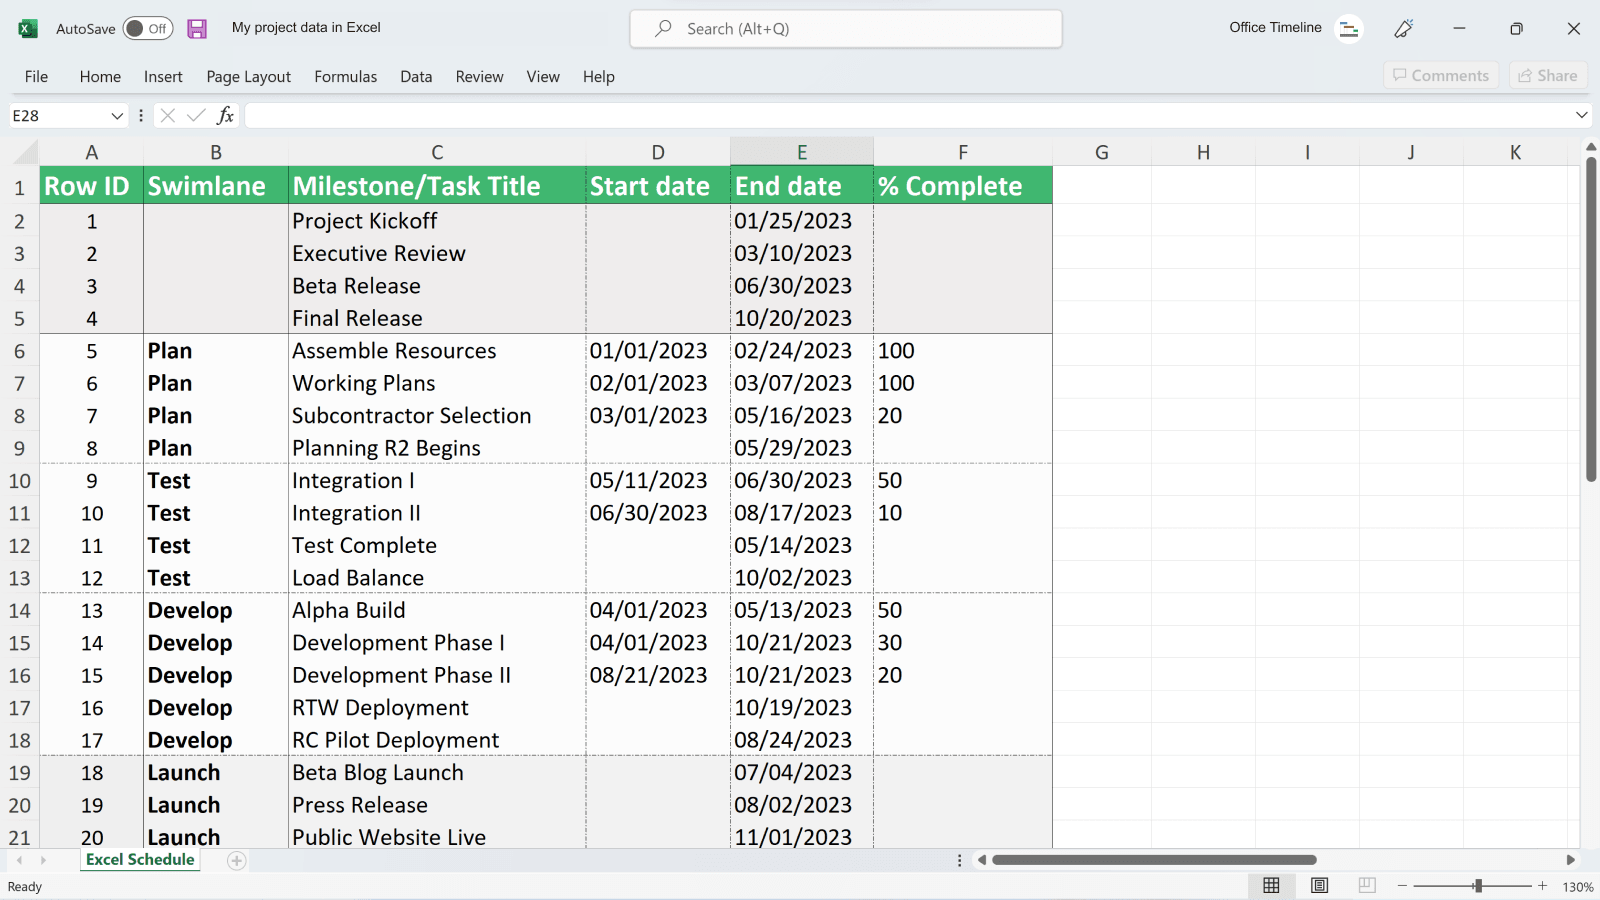 Project data in Excel before importing into Office Timeline Pro